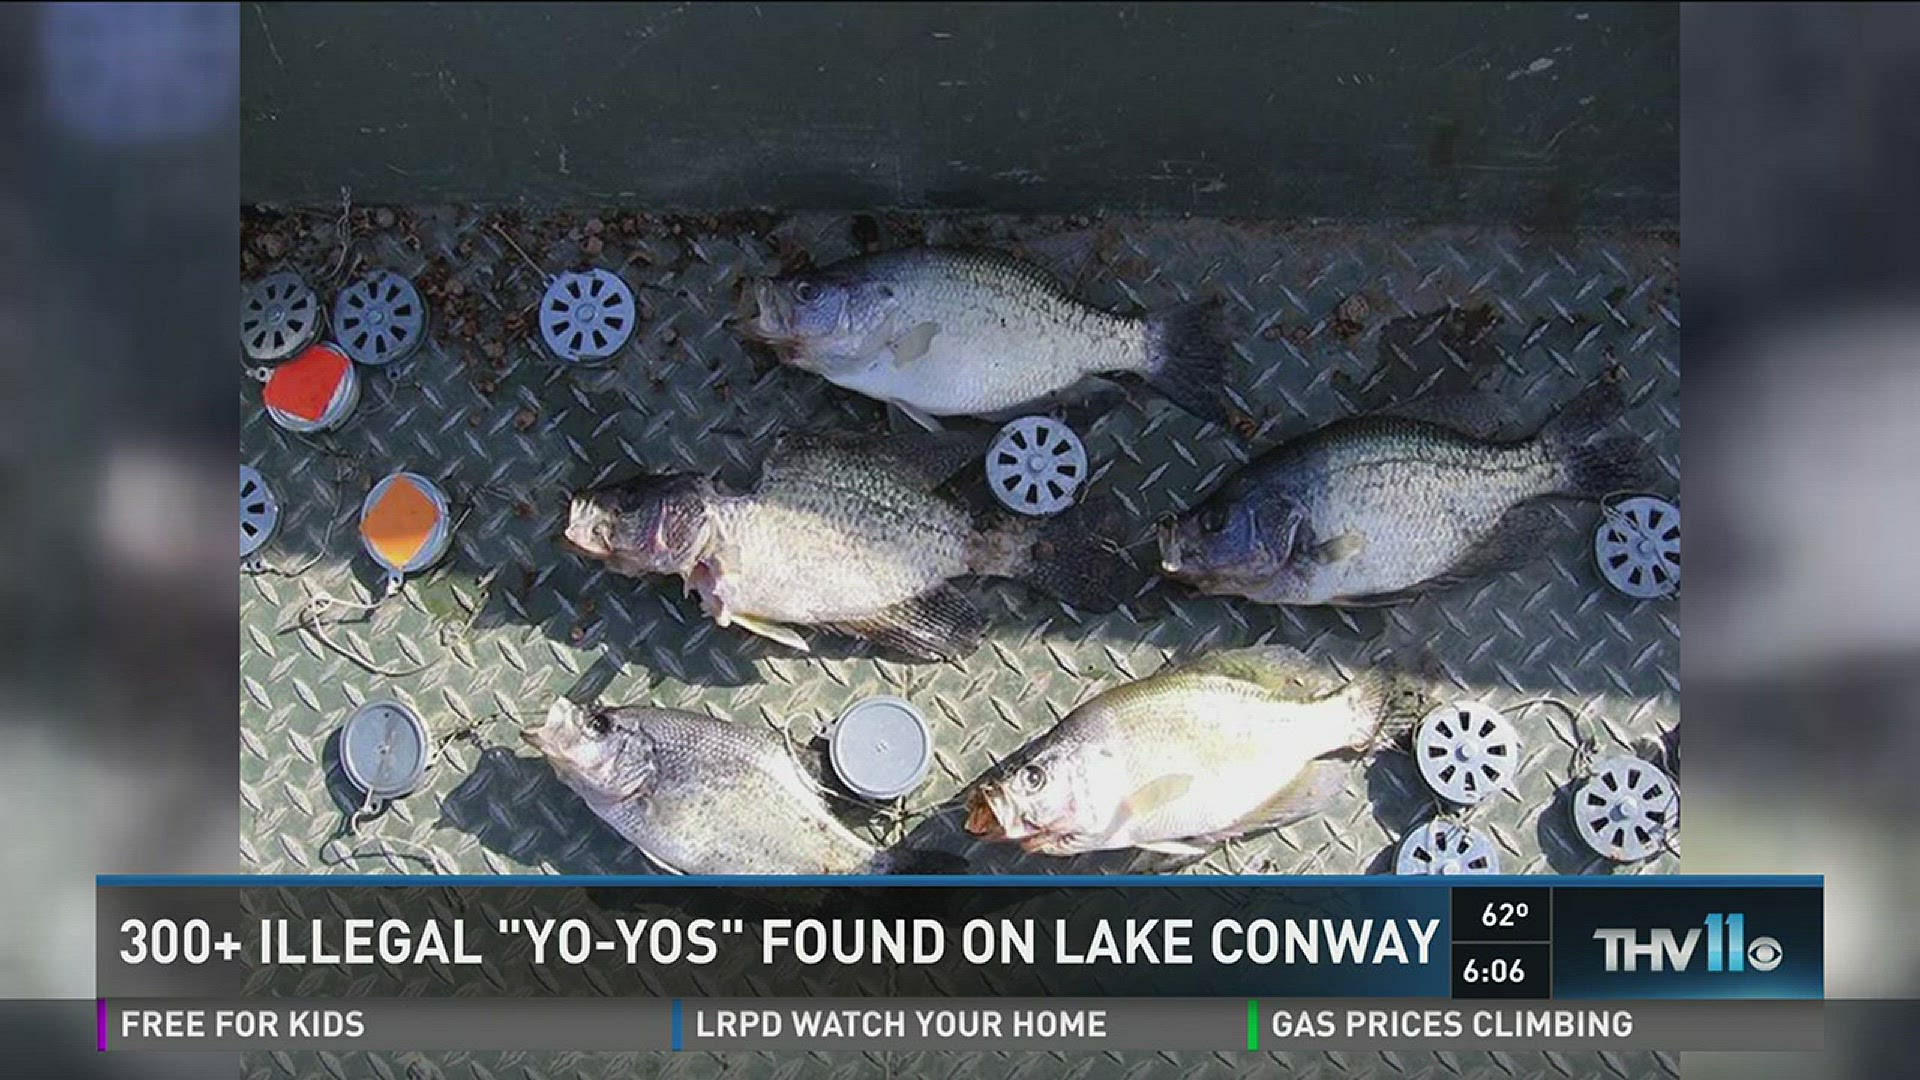 More than 300 illegal fishing devices removed from Ark. lake